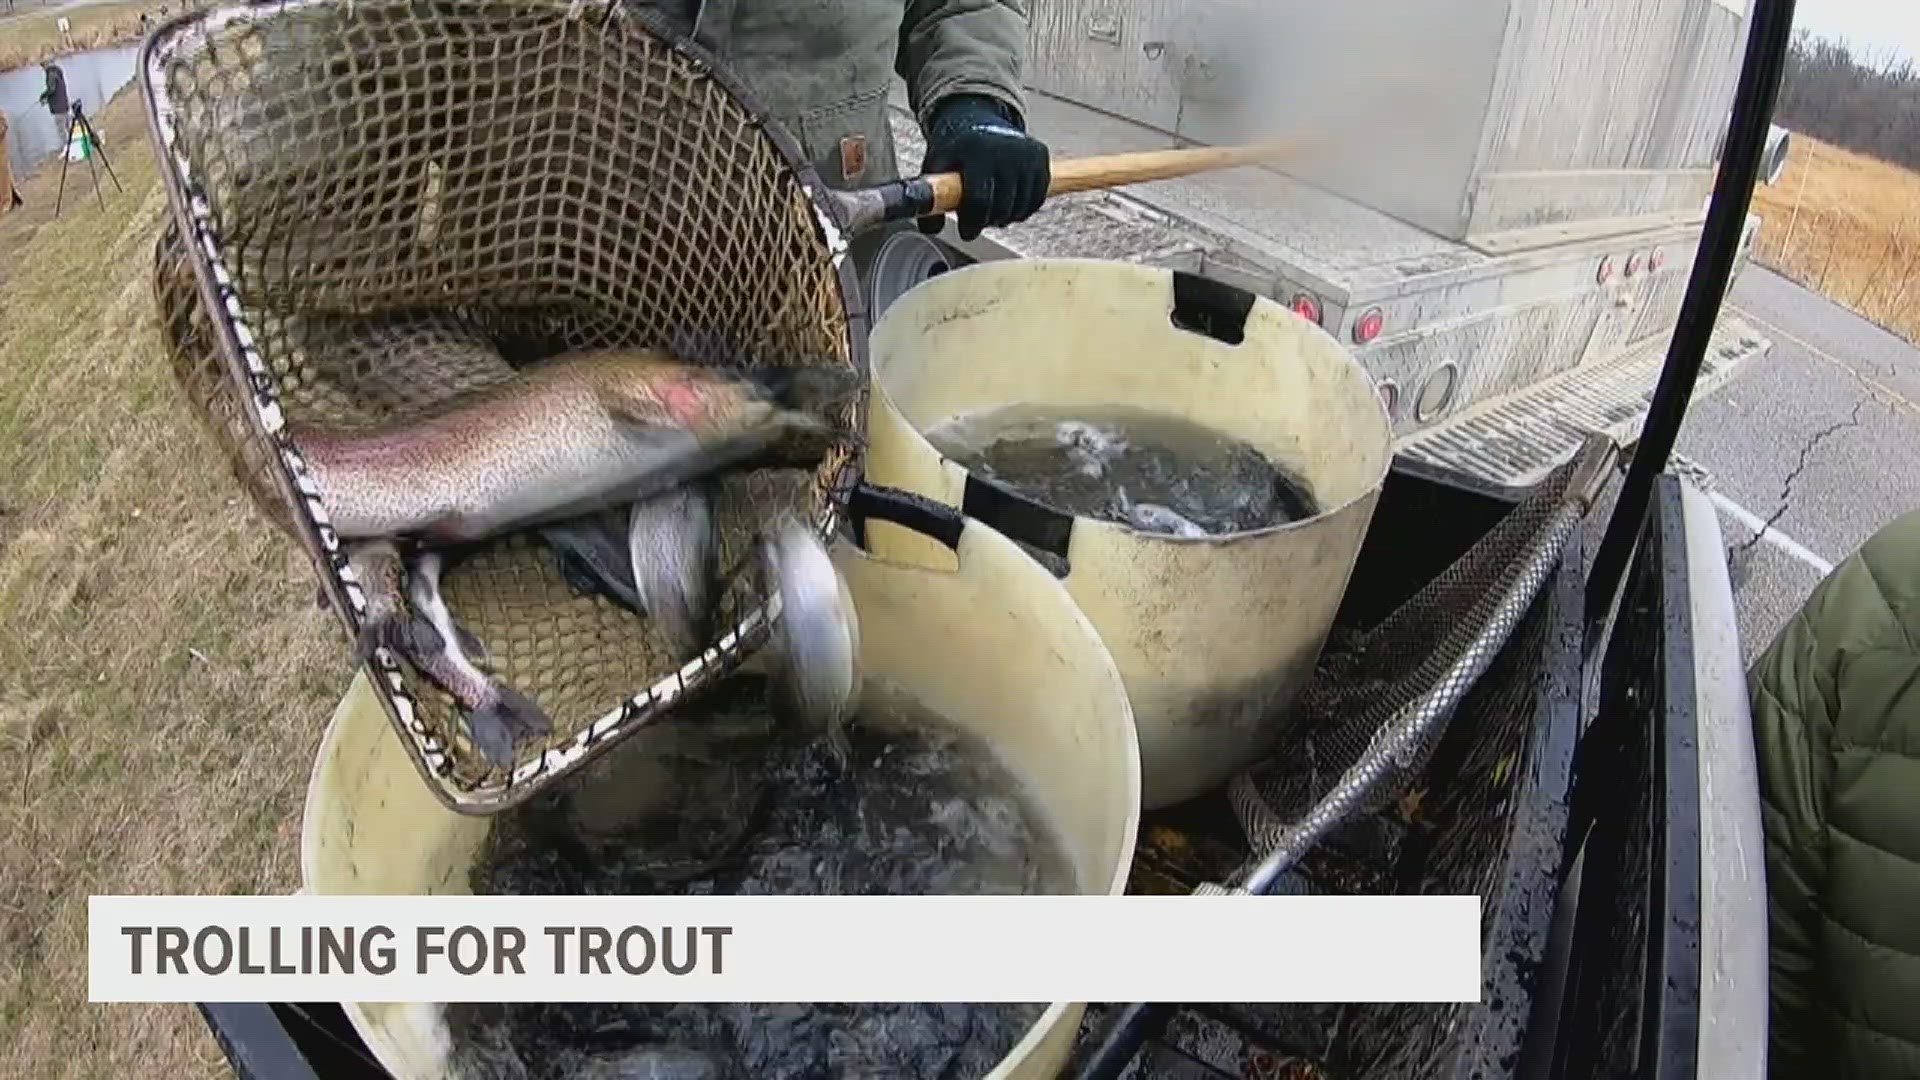 The Iowa Department of Natural Resources added 1,000 rainbow trout to the pond at Discovery Park in Muscatine.